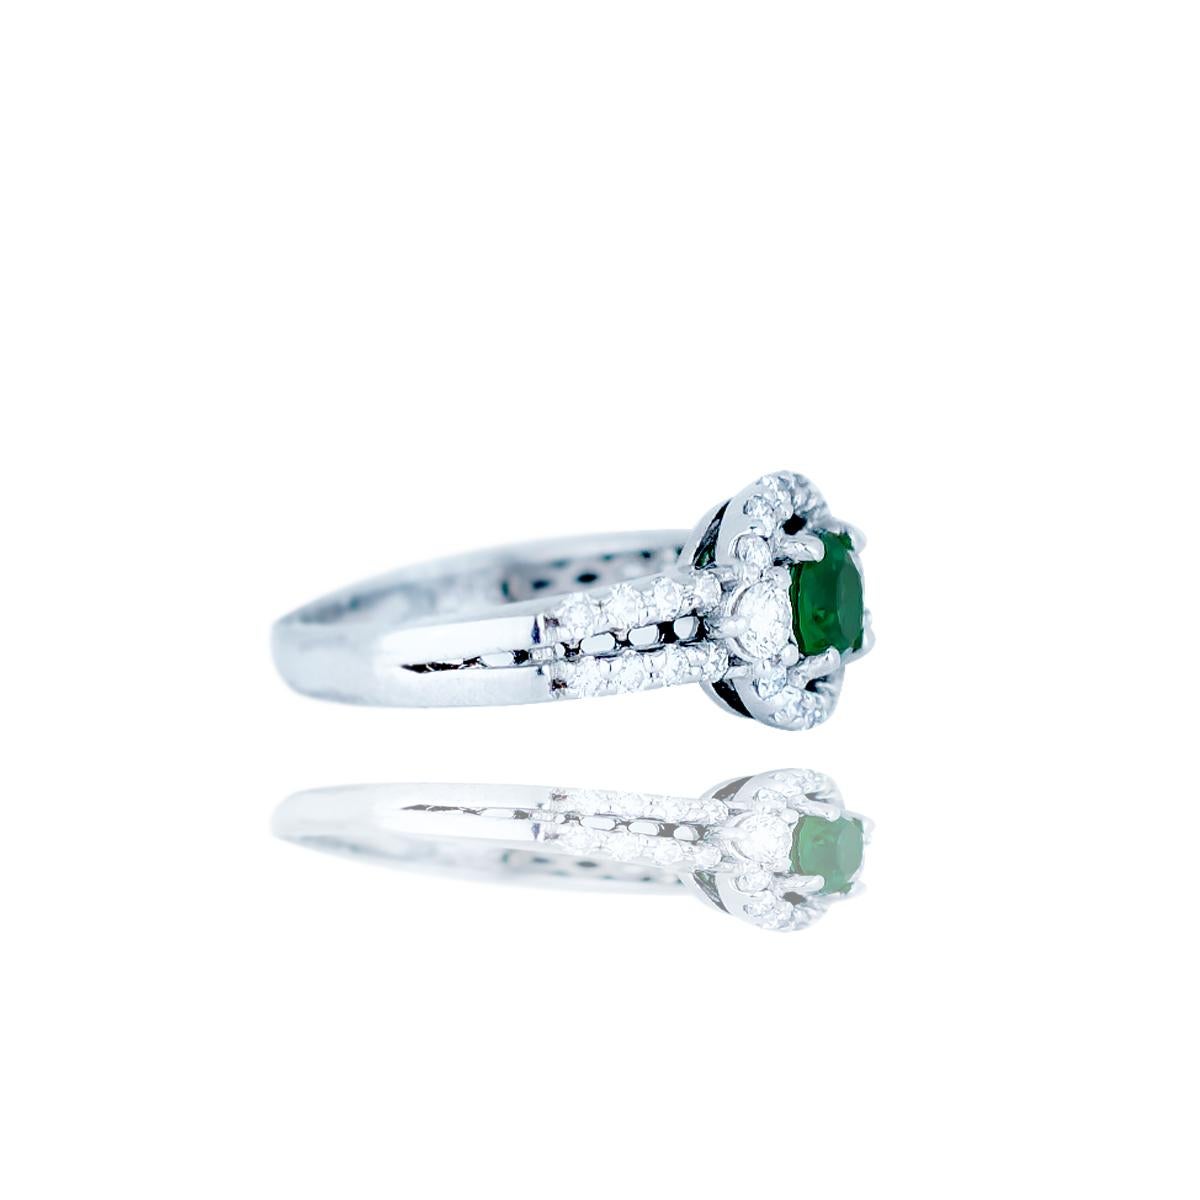 Chatham Emerald set with Diamonds in Halo Diamond Ring, 1.25TCW 
Round Shaped, measures 5.40 mm and is a deep colored Chatham Emerald stone weighing approximately .50 carat 
The rings diamonds are 1.8-3.2 mm each with a total weight of estimated .75